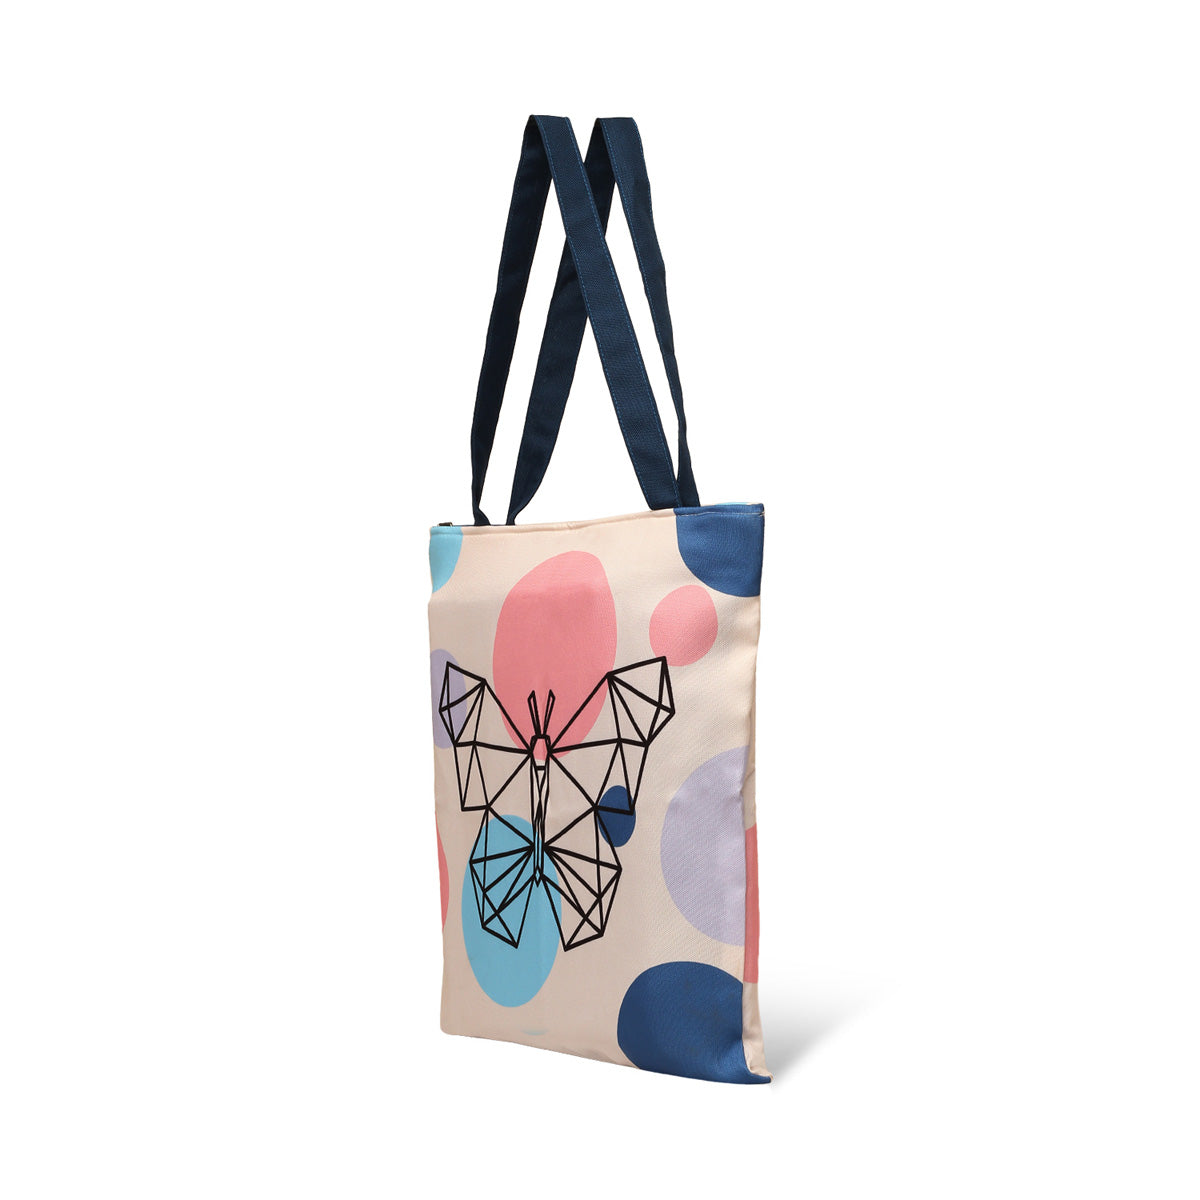 tote bag side view with butterfly prints and blue color handle